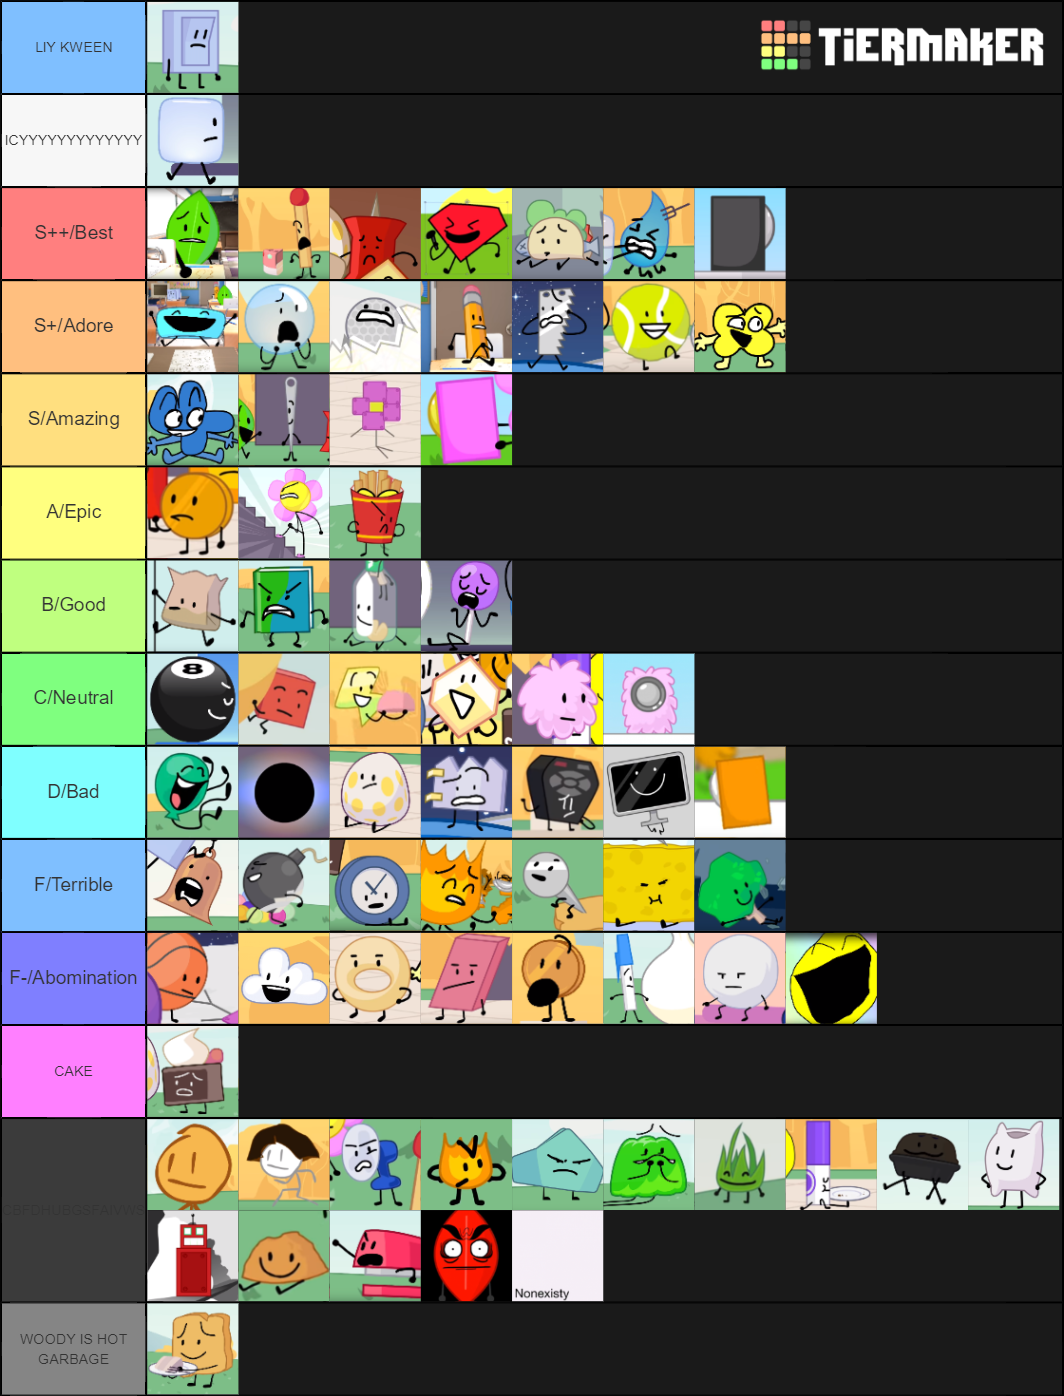 I made a tier list of how many bfdi characters I can beat in a fight (also  includes recommended characters) : r/BattleForDreamIsland